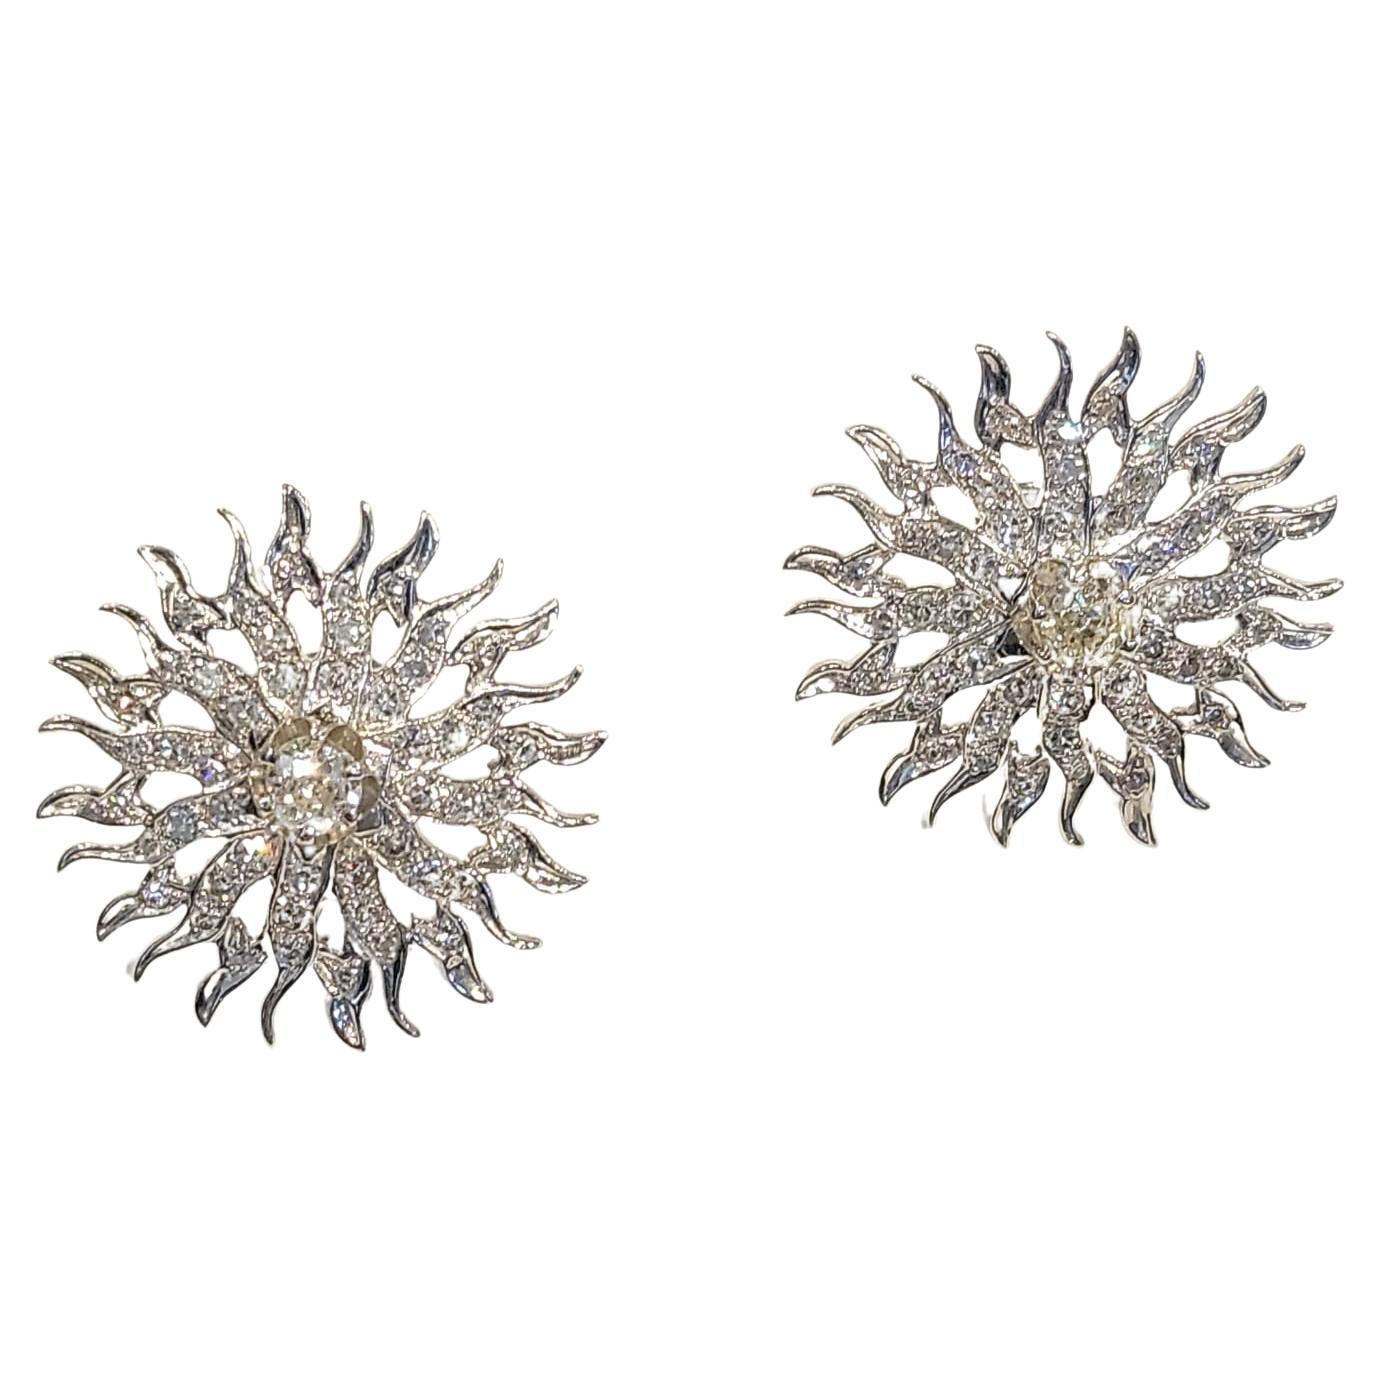 Sun Motif Old Mine Diamond Earrings

A pair of 14-karat white gold earrings featuring a sun motif, set with 2 central old mine diamonds weighing approximately 1.39 carats, accented by an additional 2.4 carats of diamonds

Diameter: 1.25